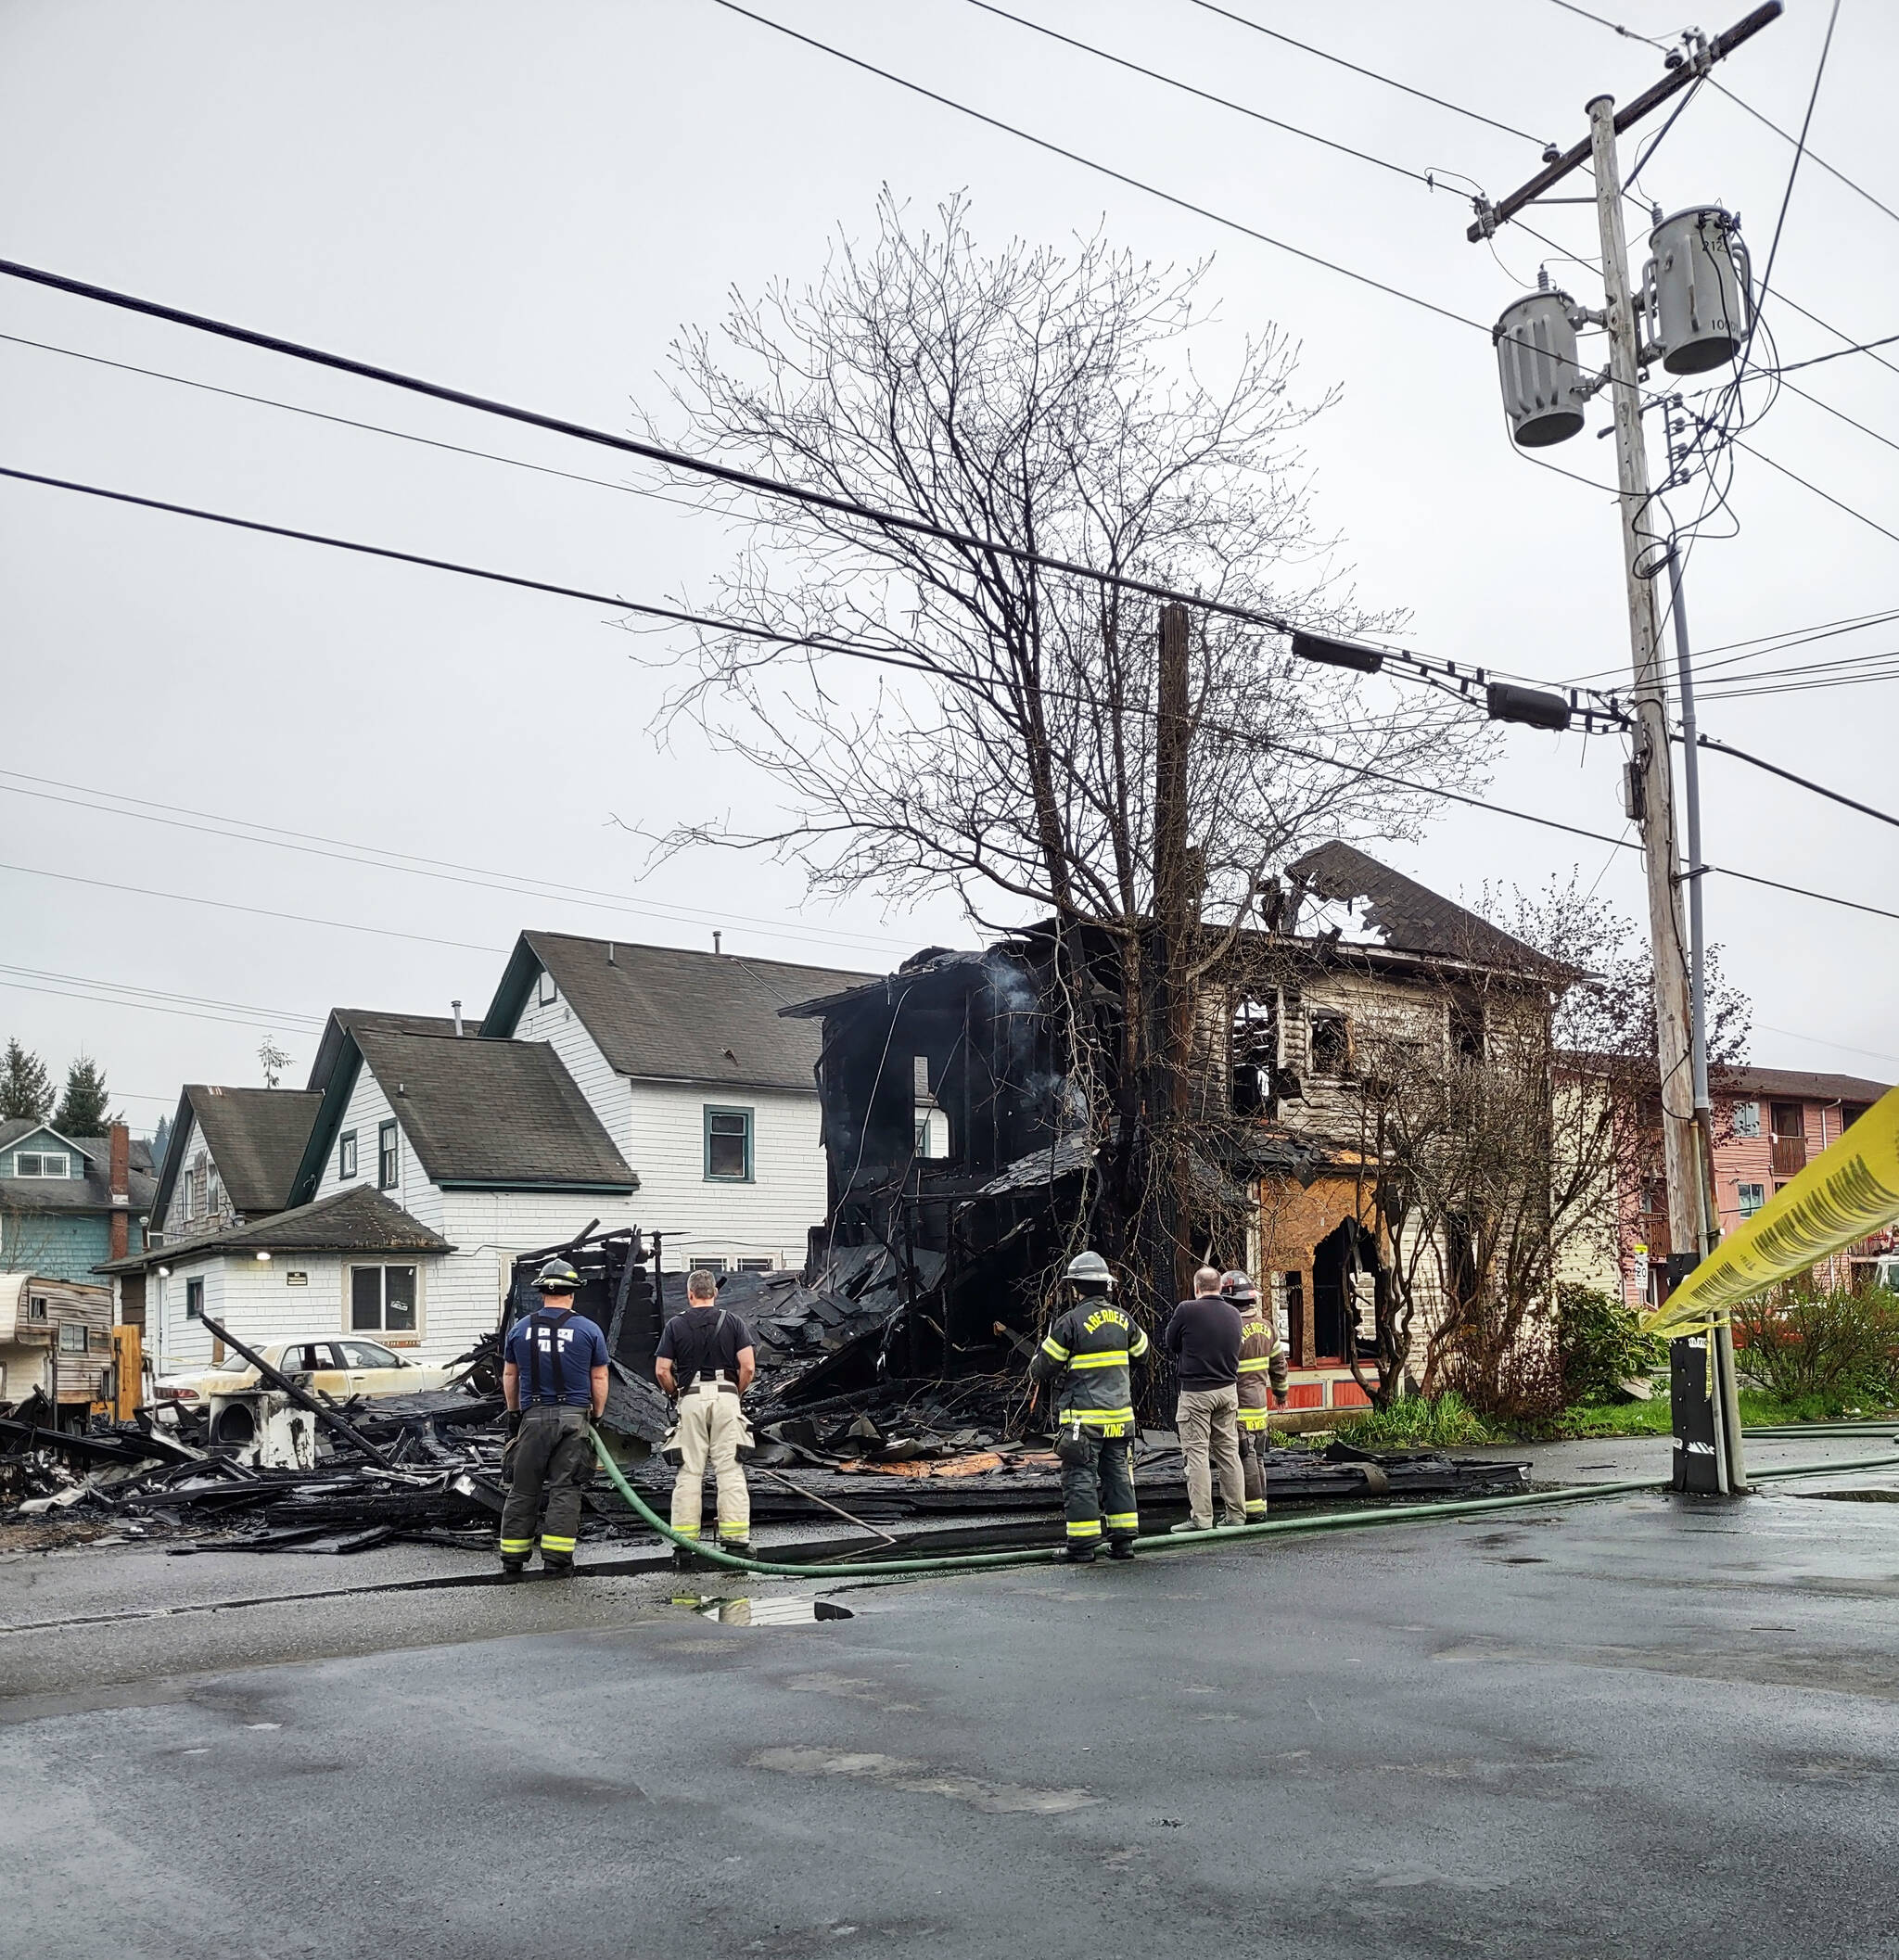 Aberdeen Firefighters look on at the damage to the two-story “vacant” residence that fire destroyed Saturday morning, April 23, at 215 N. H St., in Aberdeen. (Christopher Woodland)